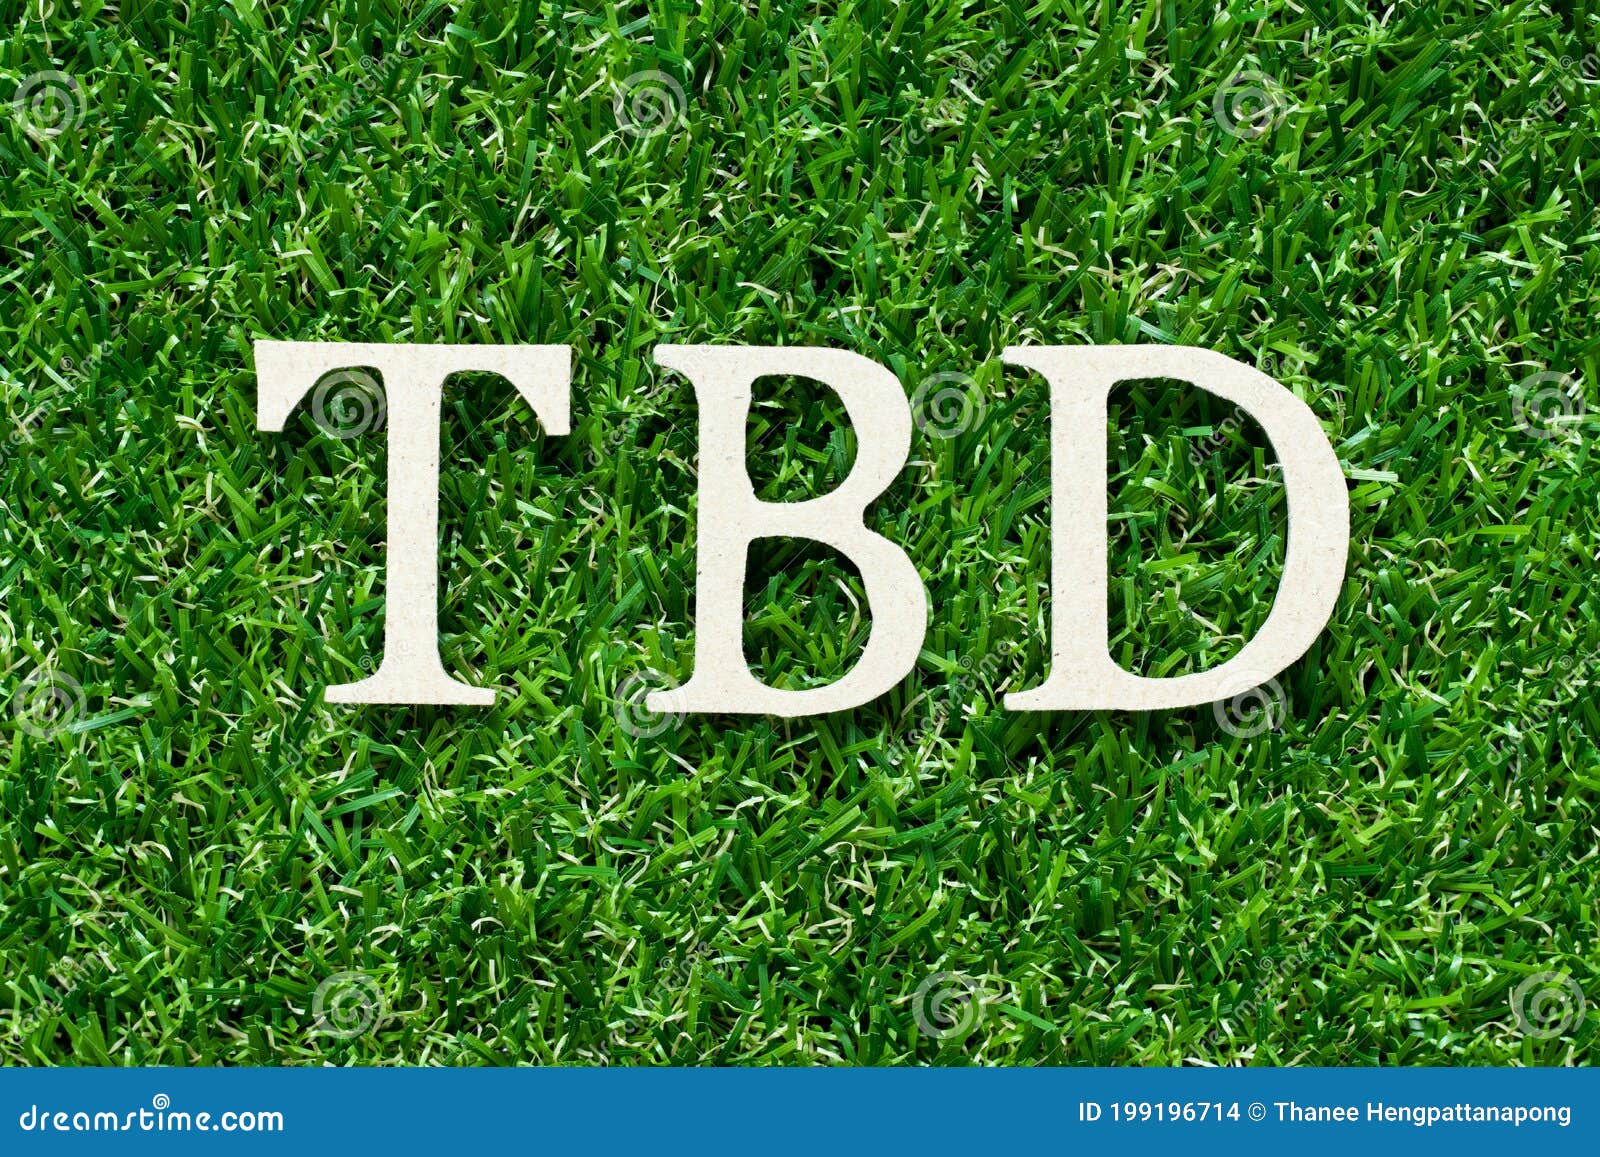 wood letter in word tbd abbreviation of to be defined, discussed, determined, decided, deleted or declared on green